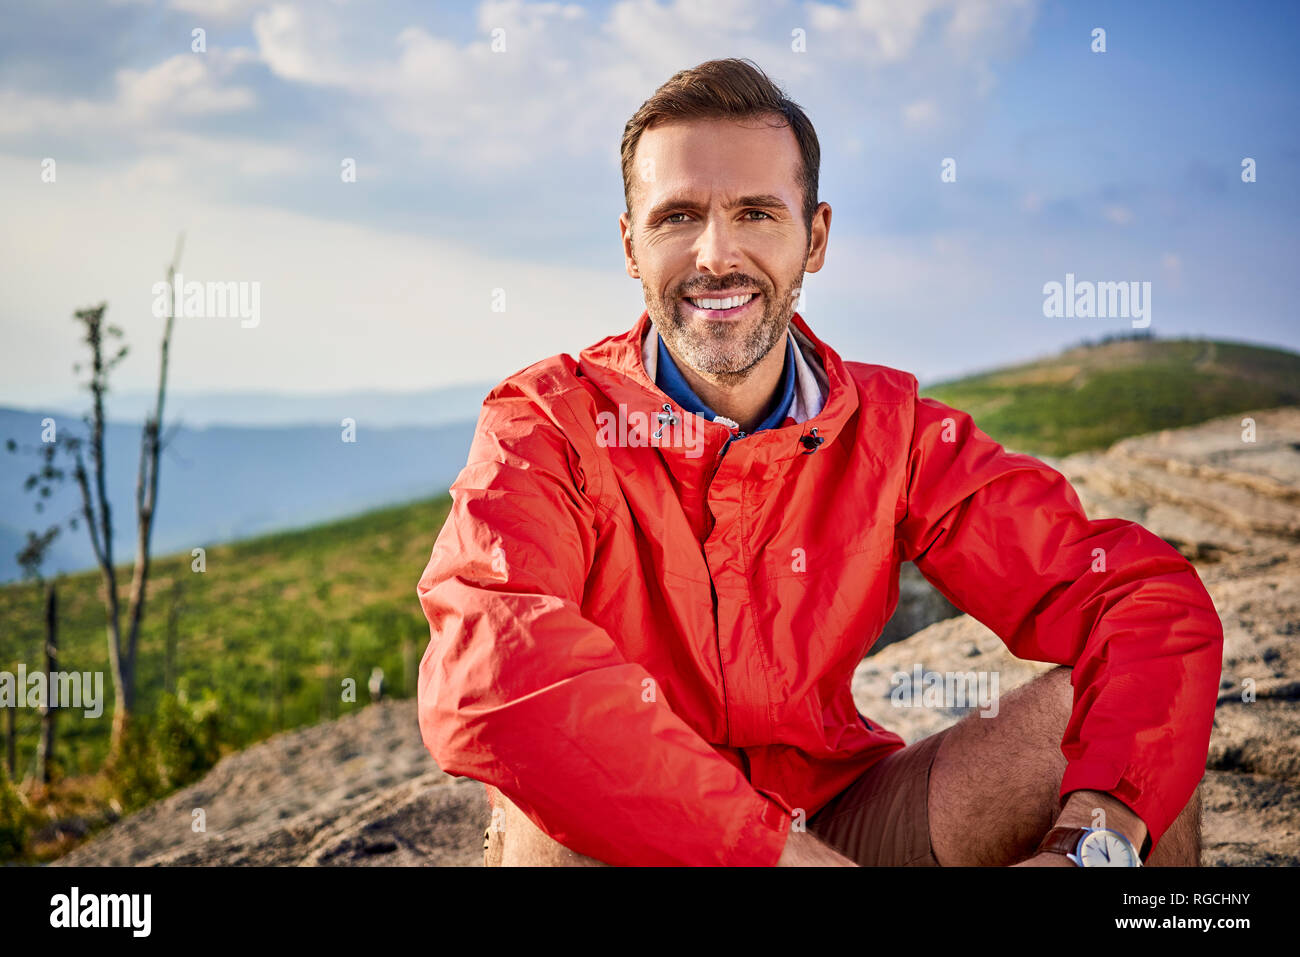 Portrait of smiling man sitting on rock during hiking trip Stock Photo